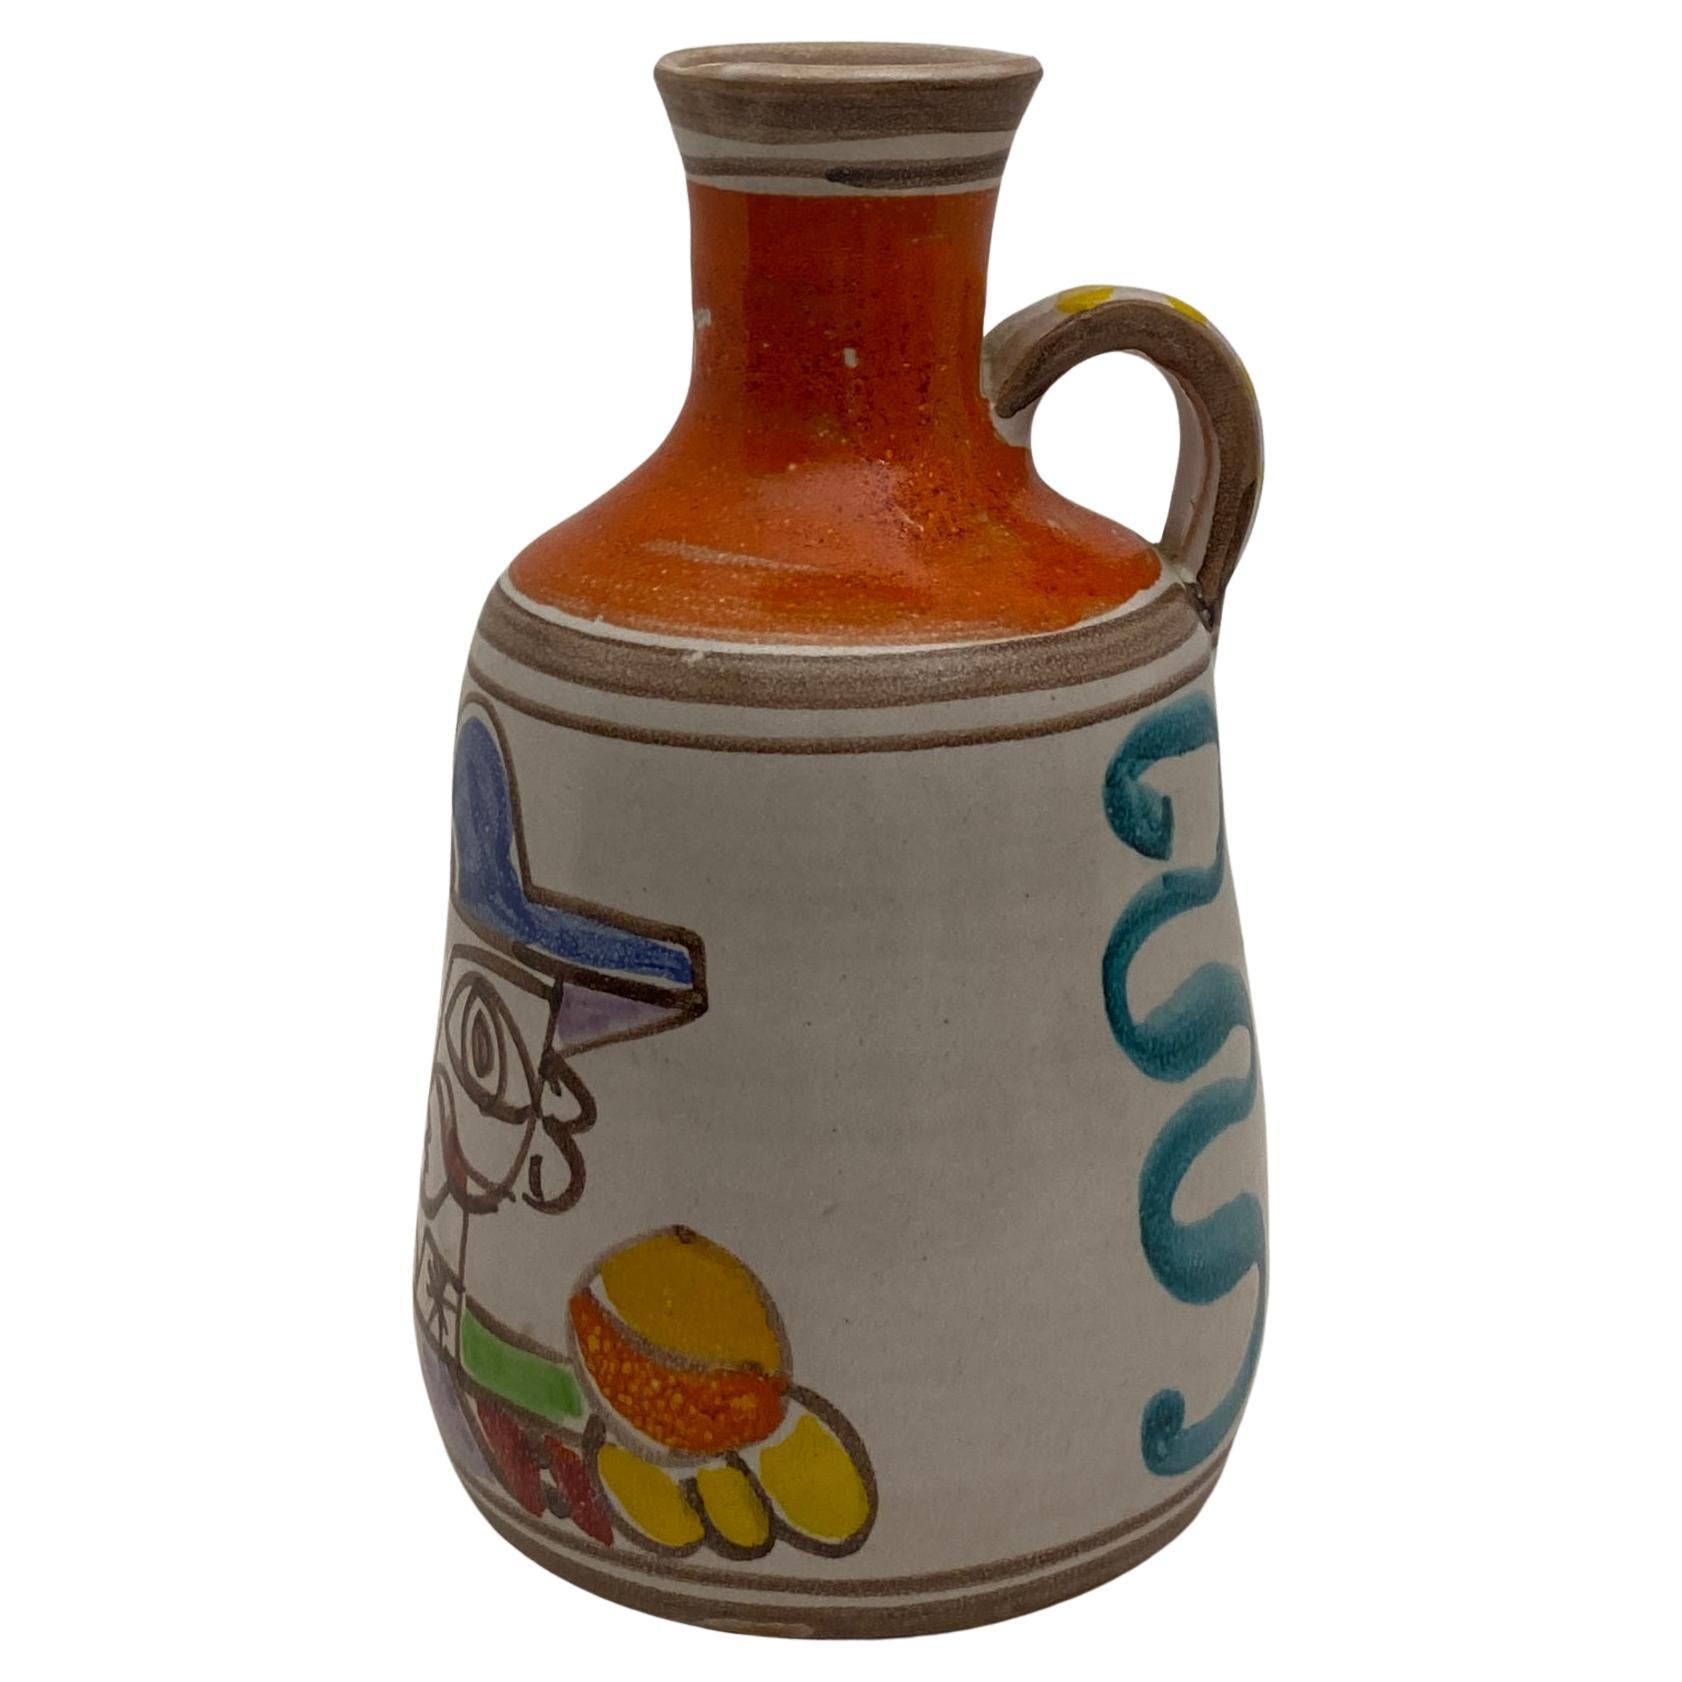 One-of-kind handled vase, hand-crafted and hand-painted by Giovanni Desimone. Great design with a whimsical figurative image on the front and other accentuating decor on the sides.

Signed and numbered, this rare piece is colorful as are all